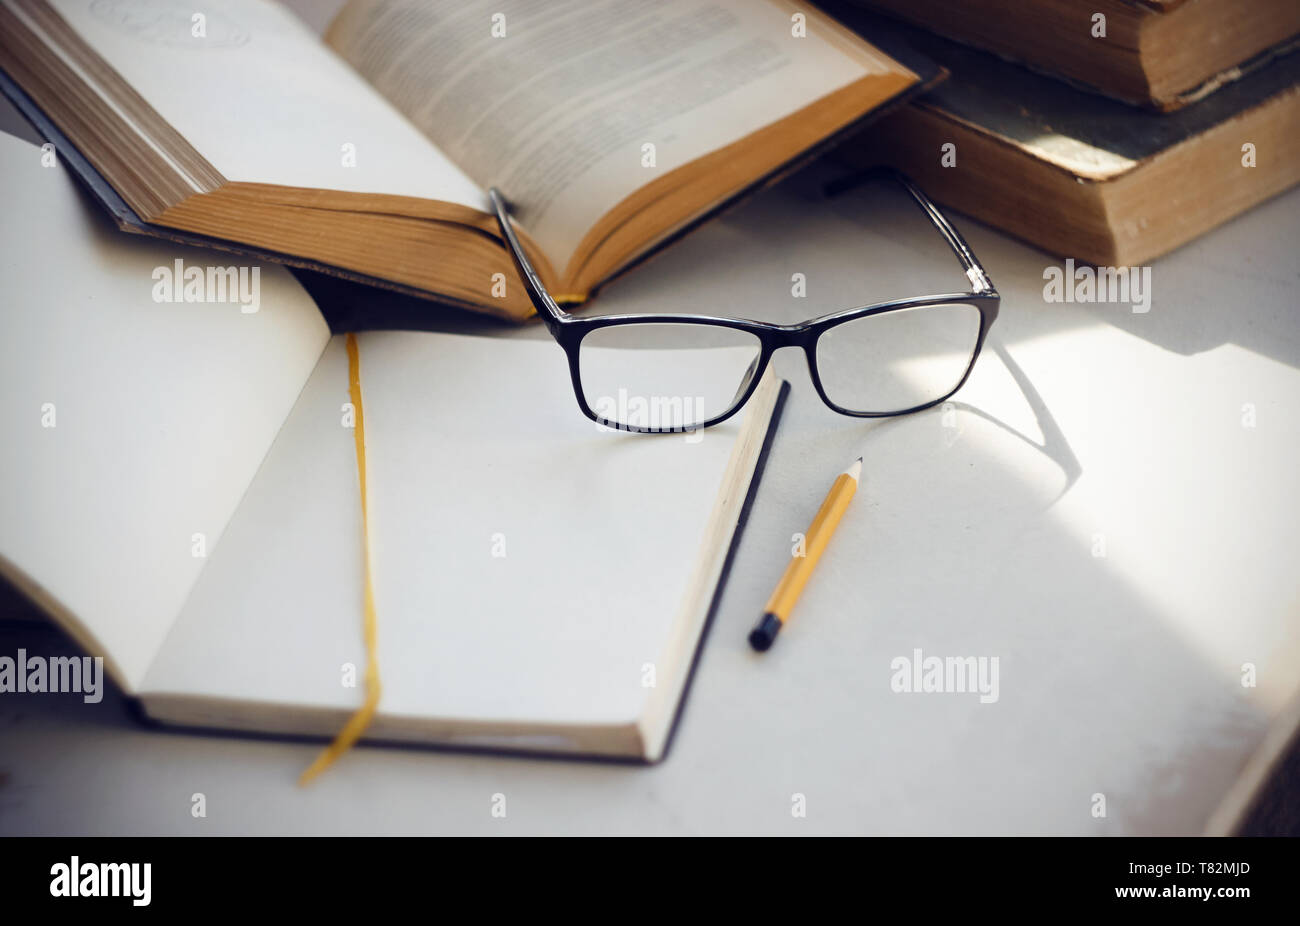 Items needed for scientific research: ancient encyclopedias, a notebook with a yellow bookmark , glasses, a yellow pencil and an open book with inform Stock Photo